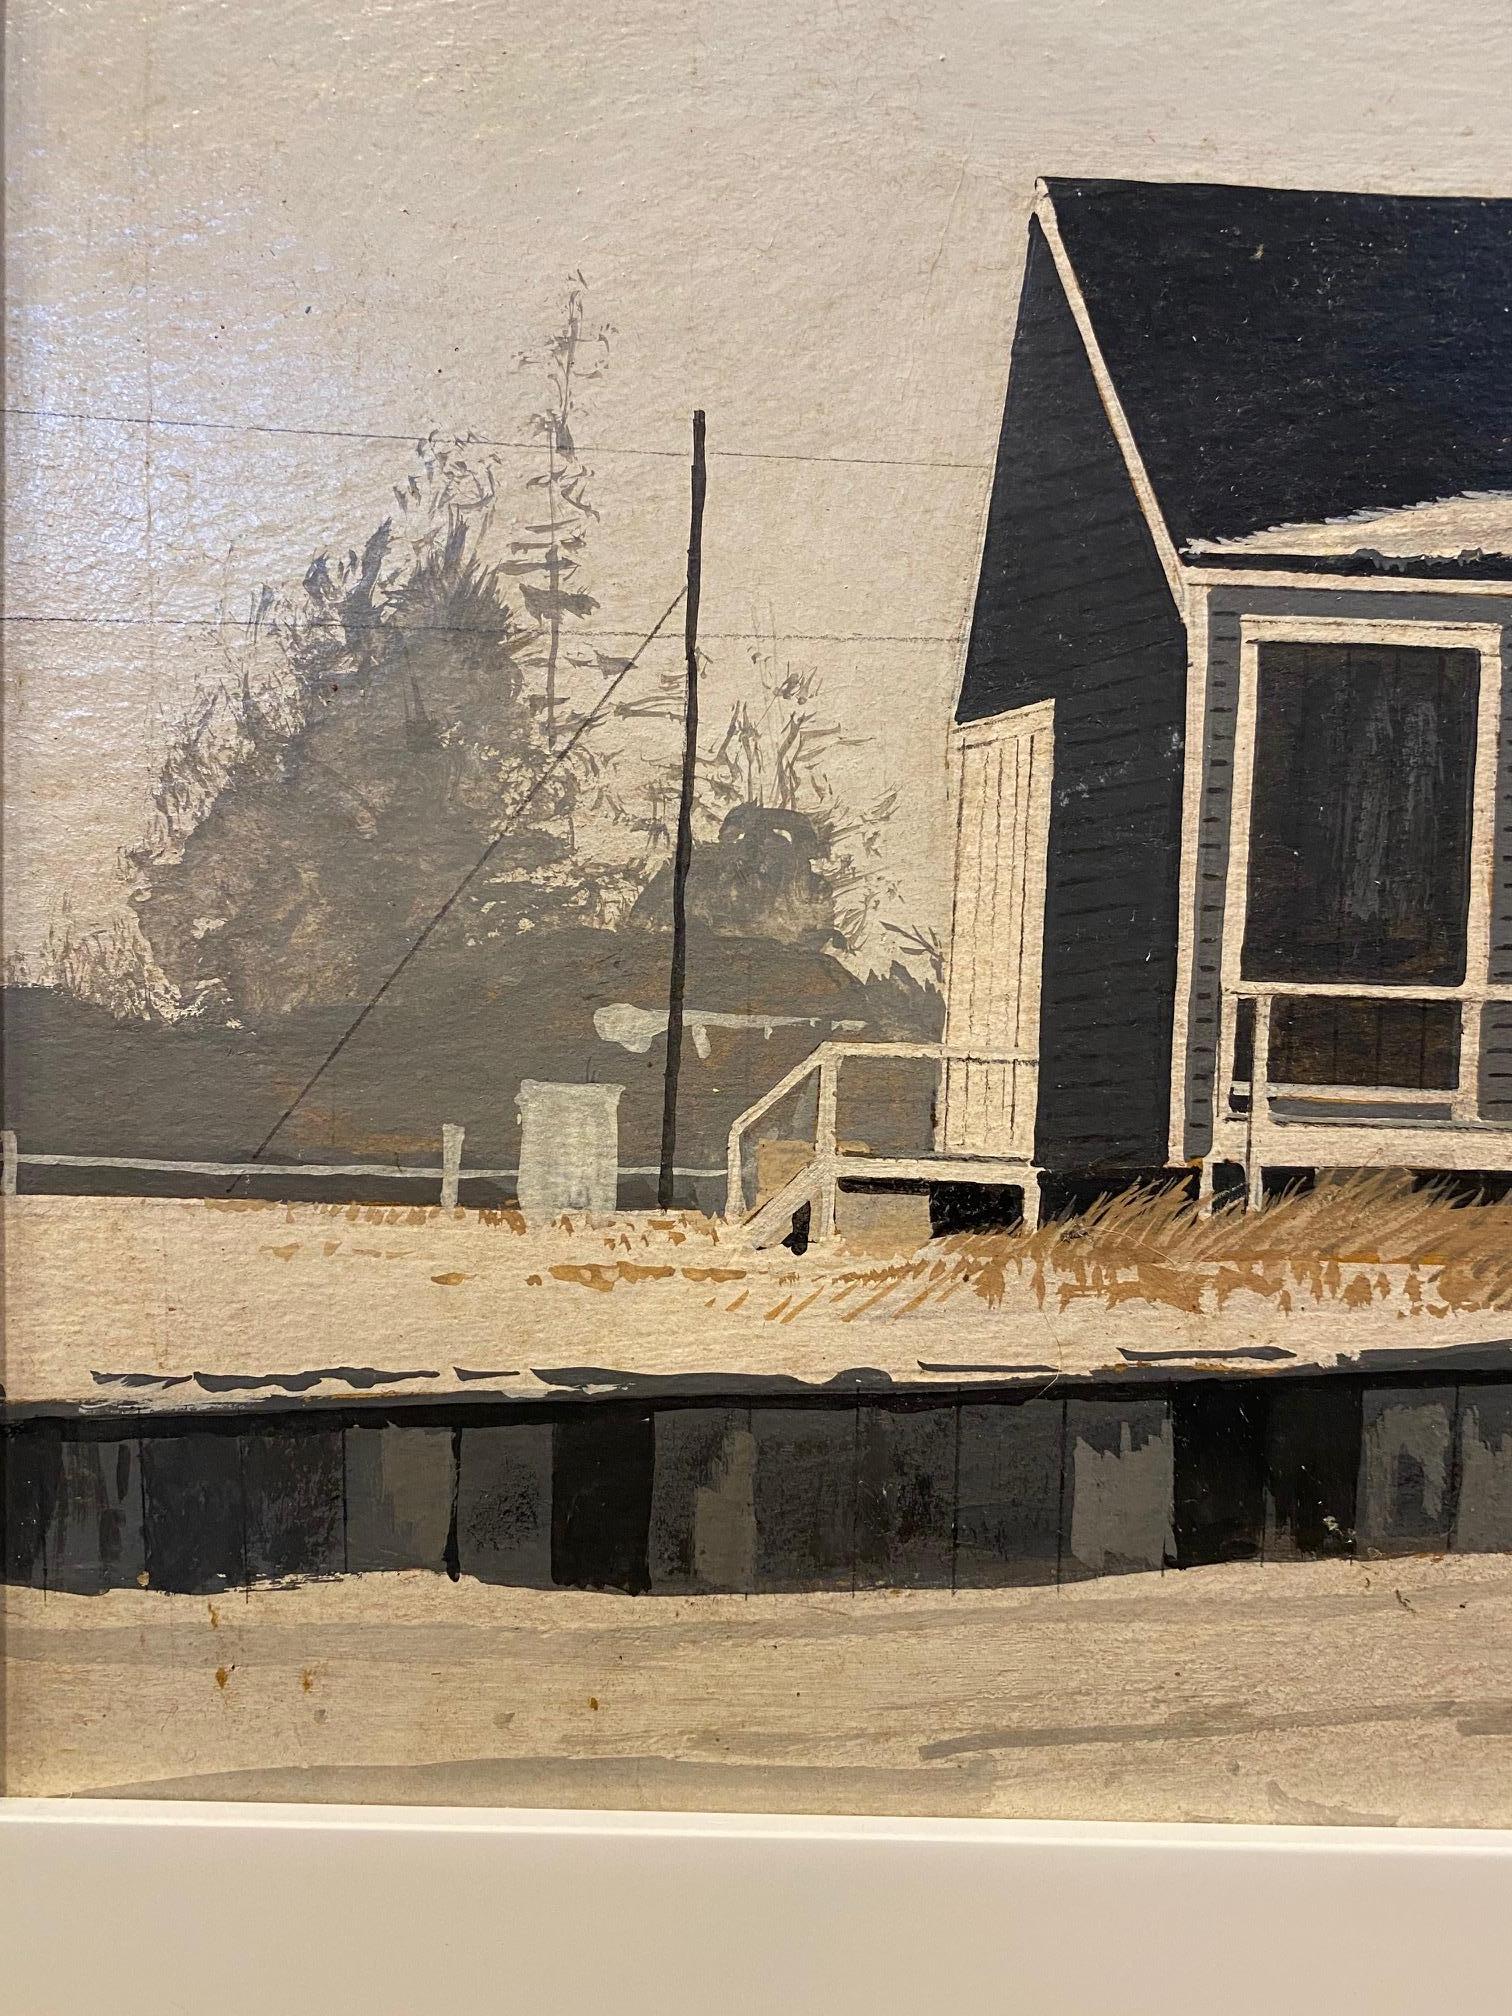 Nantucket Winter Landscape Painting by John Austin (Nantucket 1918-2000), circa 1977, an acrylic on panel view of “South Beach”, with an old beach cottage buttoned up for the winter, trimmed with snow, signed vertically in the lower right, and